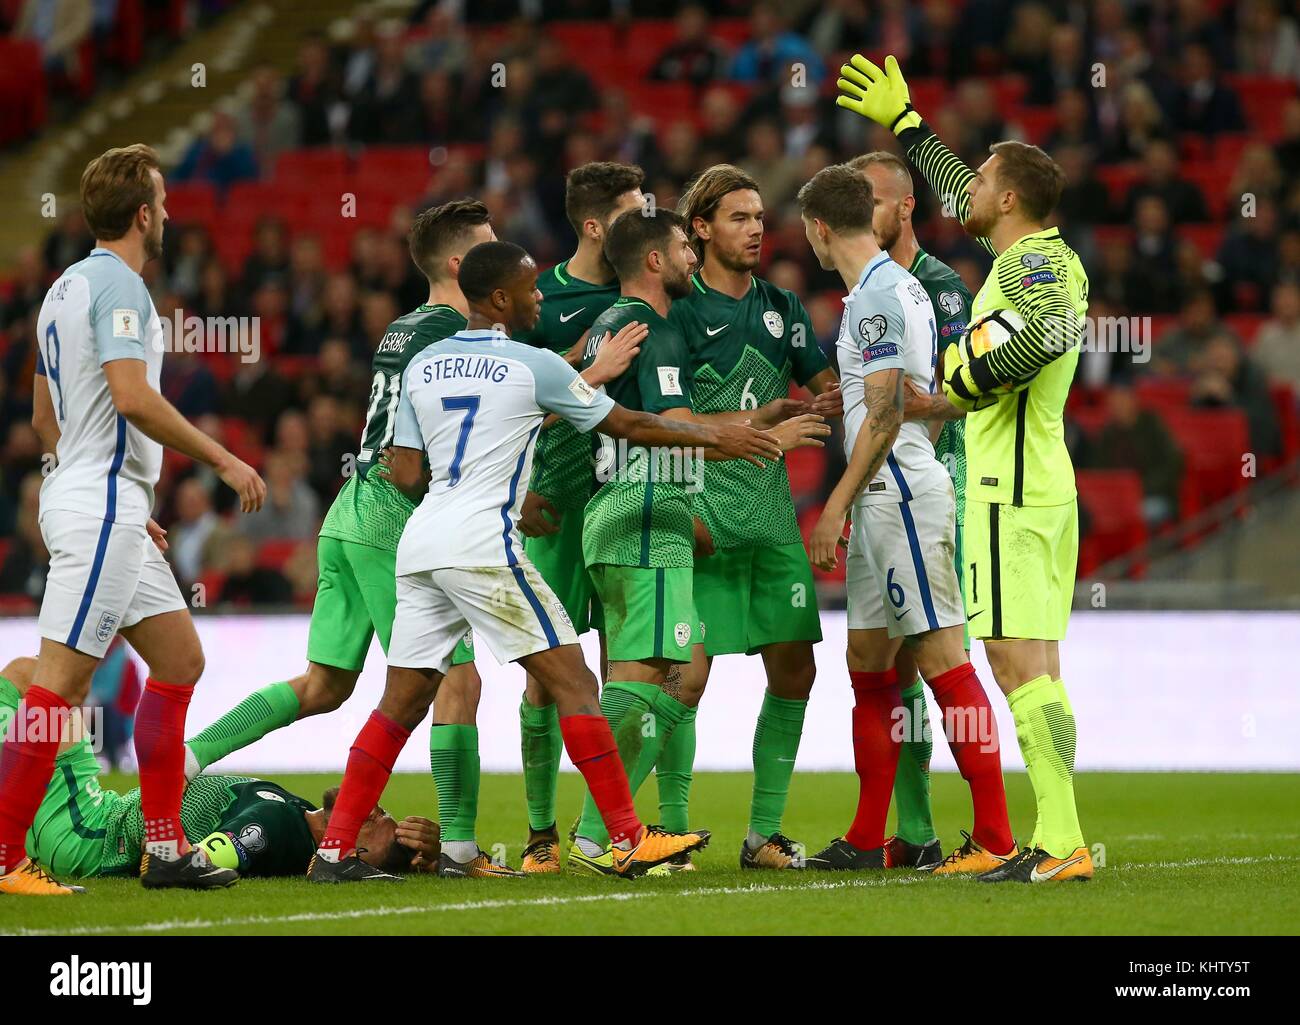 John Stones of England has words with Rene Krhin of Slovenia during the FIFA World Cup Qualifier match between England and Slovenia at Wembley Stadium in London. 05 Oct 2017 *** EDITORIAL USE ONLY *** No merchandising. For Football images FA and Premier League restrictions apply inc. no internet/mobile usage without FAPL license - for details contact Football Dataco Stock Photo